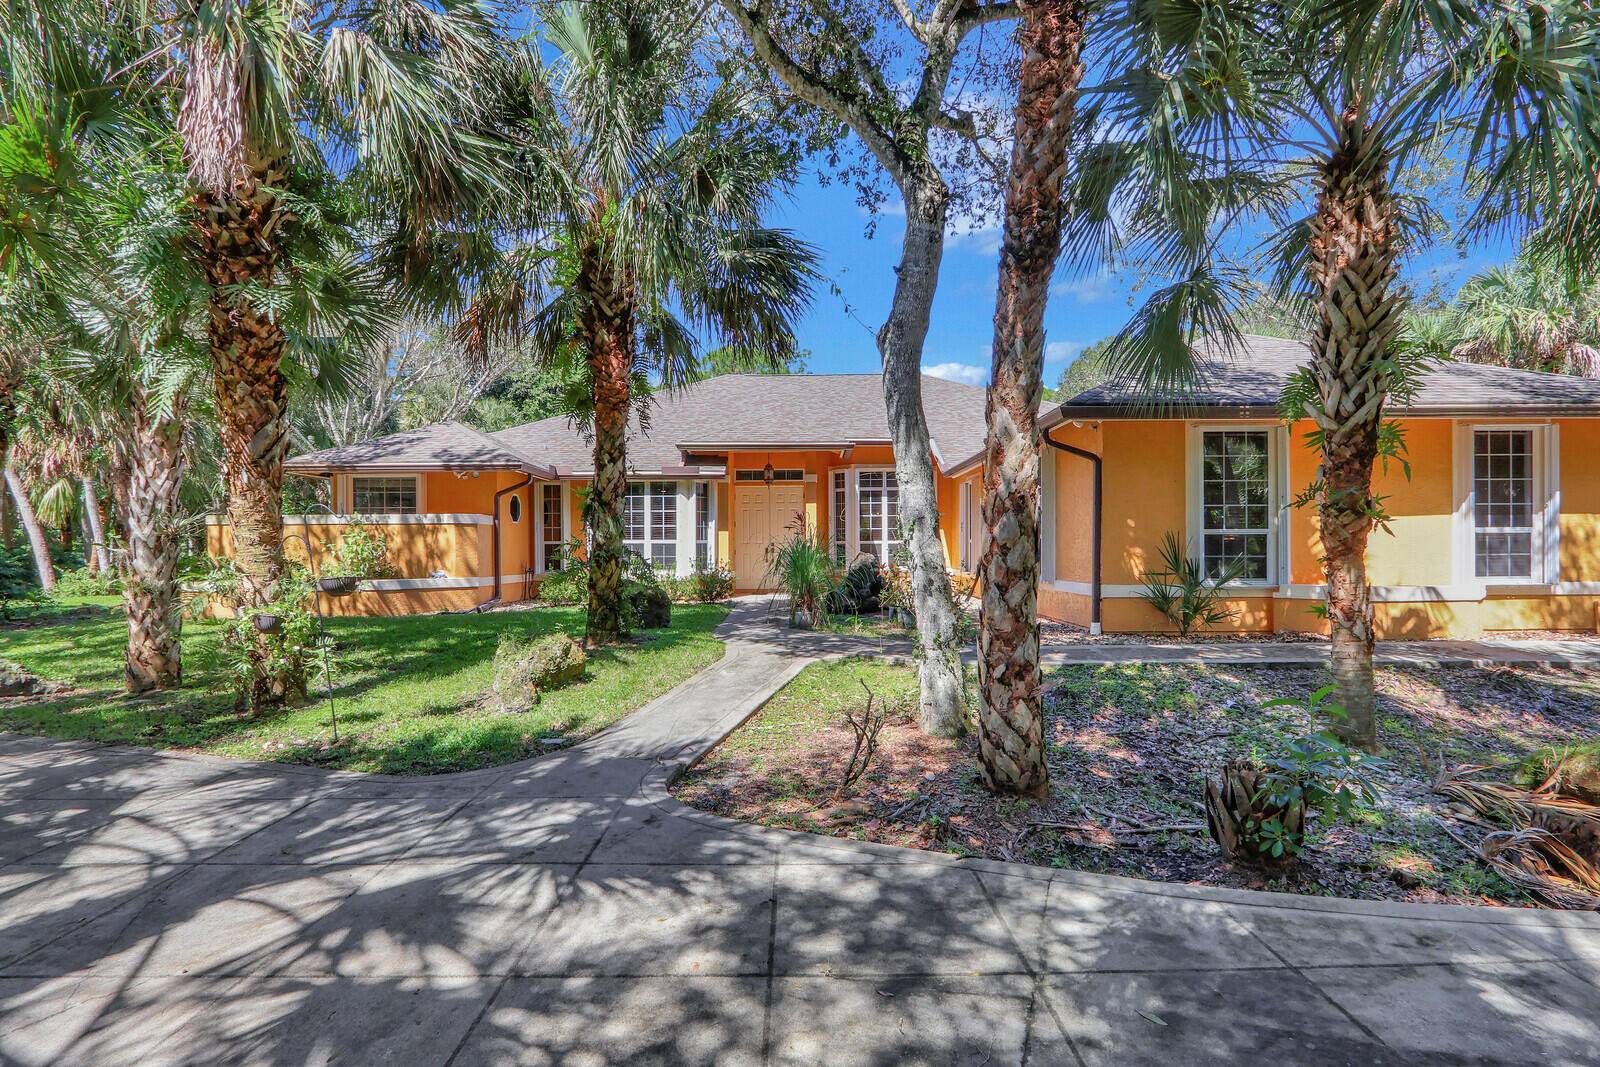 This stunning property nestled in a peaceful and desirable neighborhood of the Palm Beach Country Estates, this home offers a perfect blend of comfort, style, and convenience.